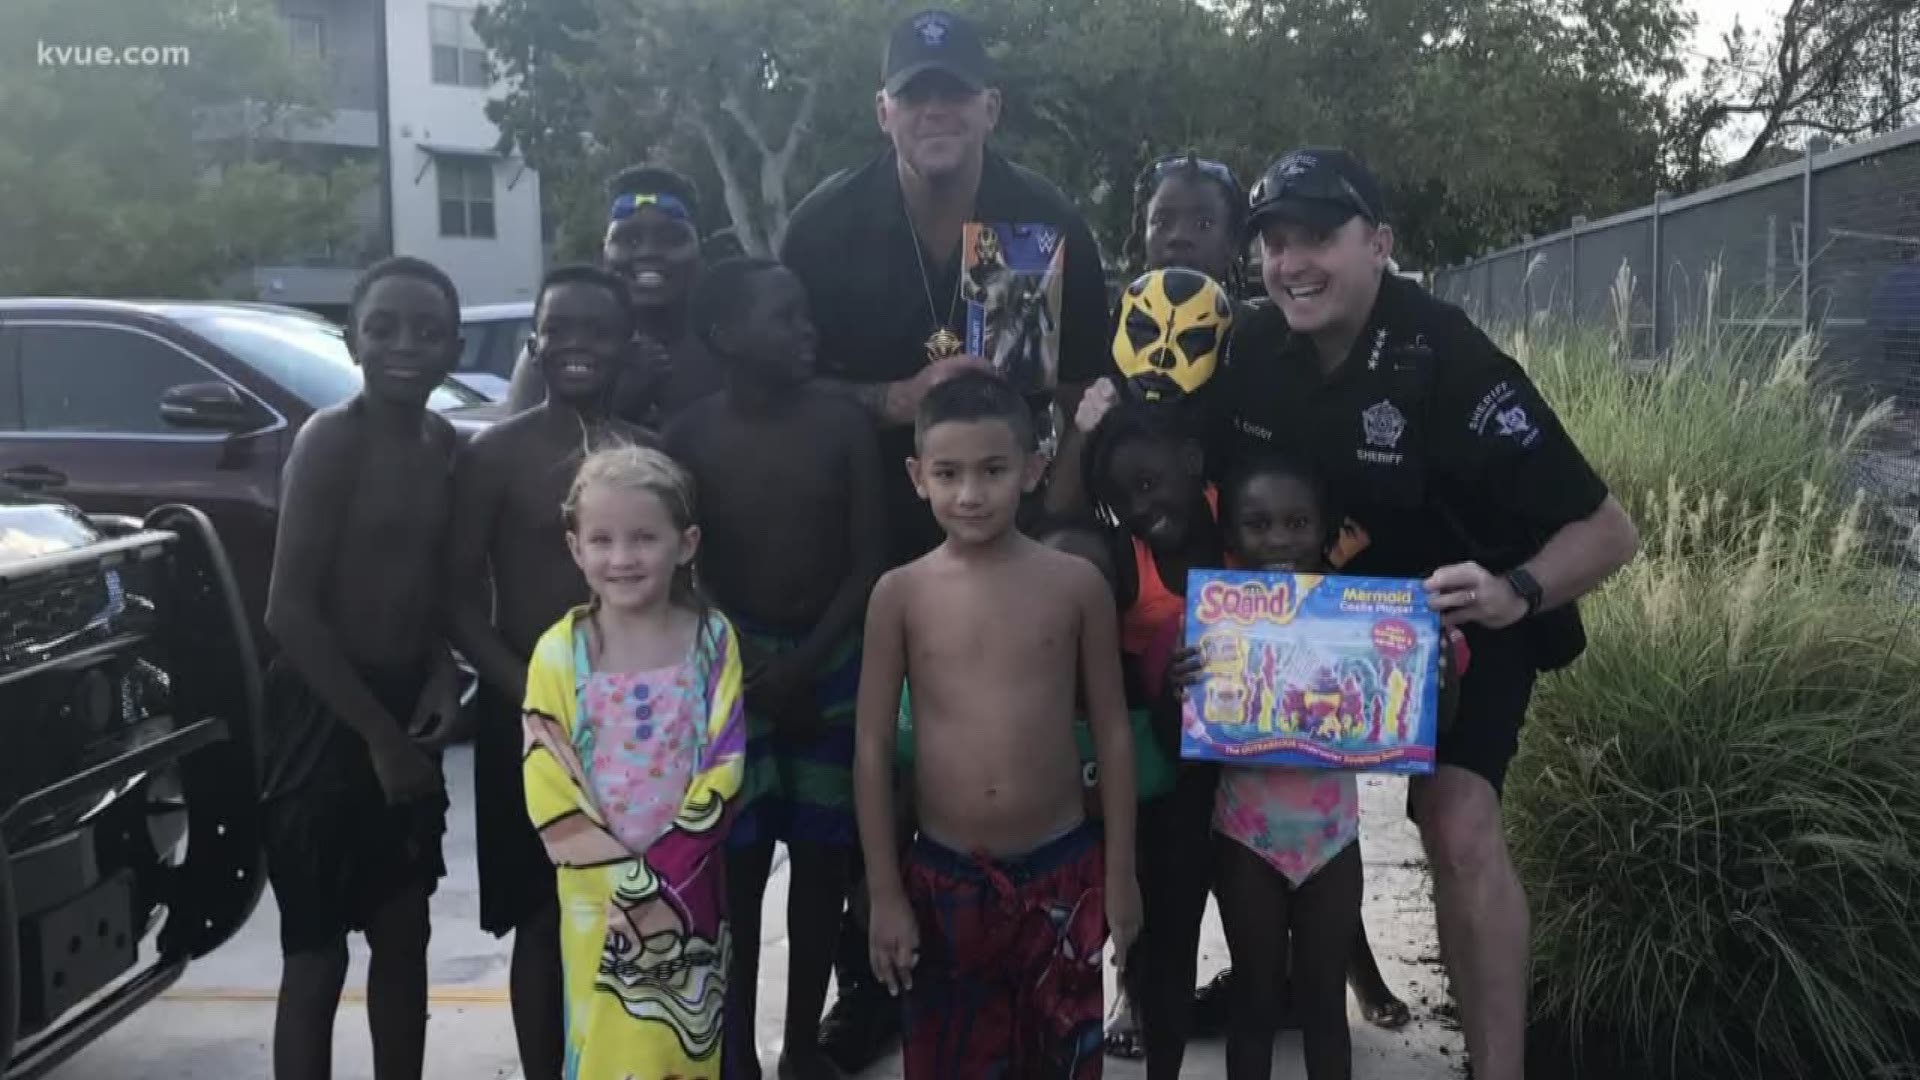 6-year-old Amirah loves Barbies, all things sparkly and police officers. Amirah's mother wanted her daughter's birthday to be special and the Williamson County Sheriff's Office made sure that happened.